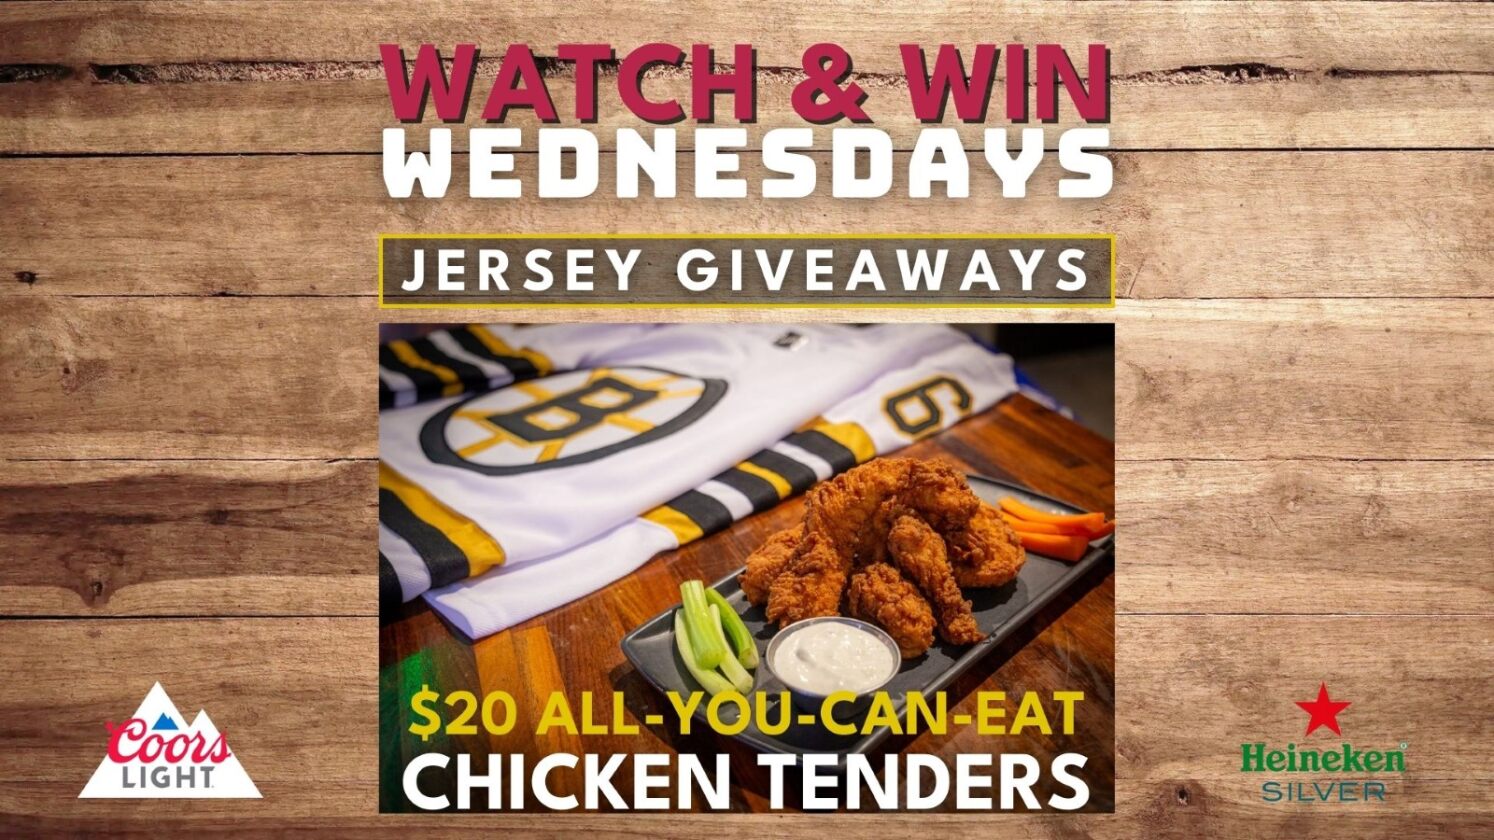 watch-and-win-wednesdays-all-you-can-eat-chicken-tenders-jersey-giveaway